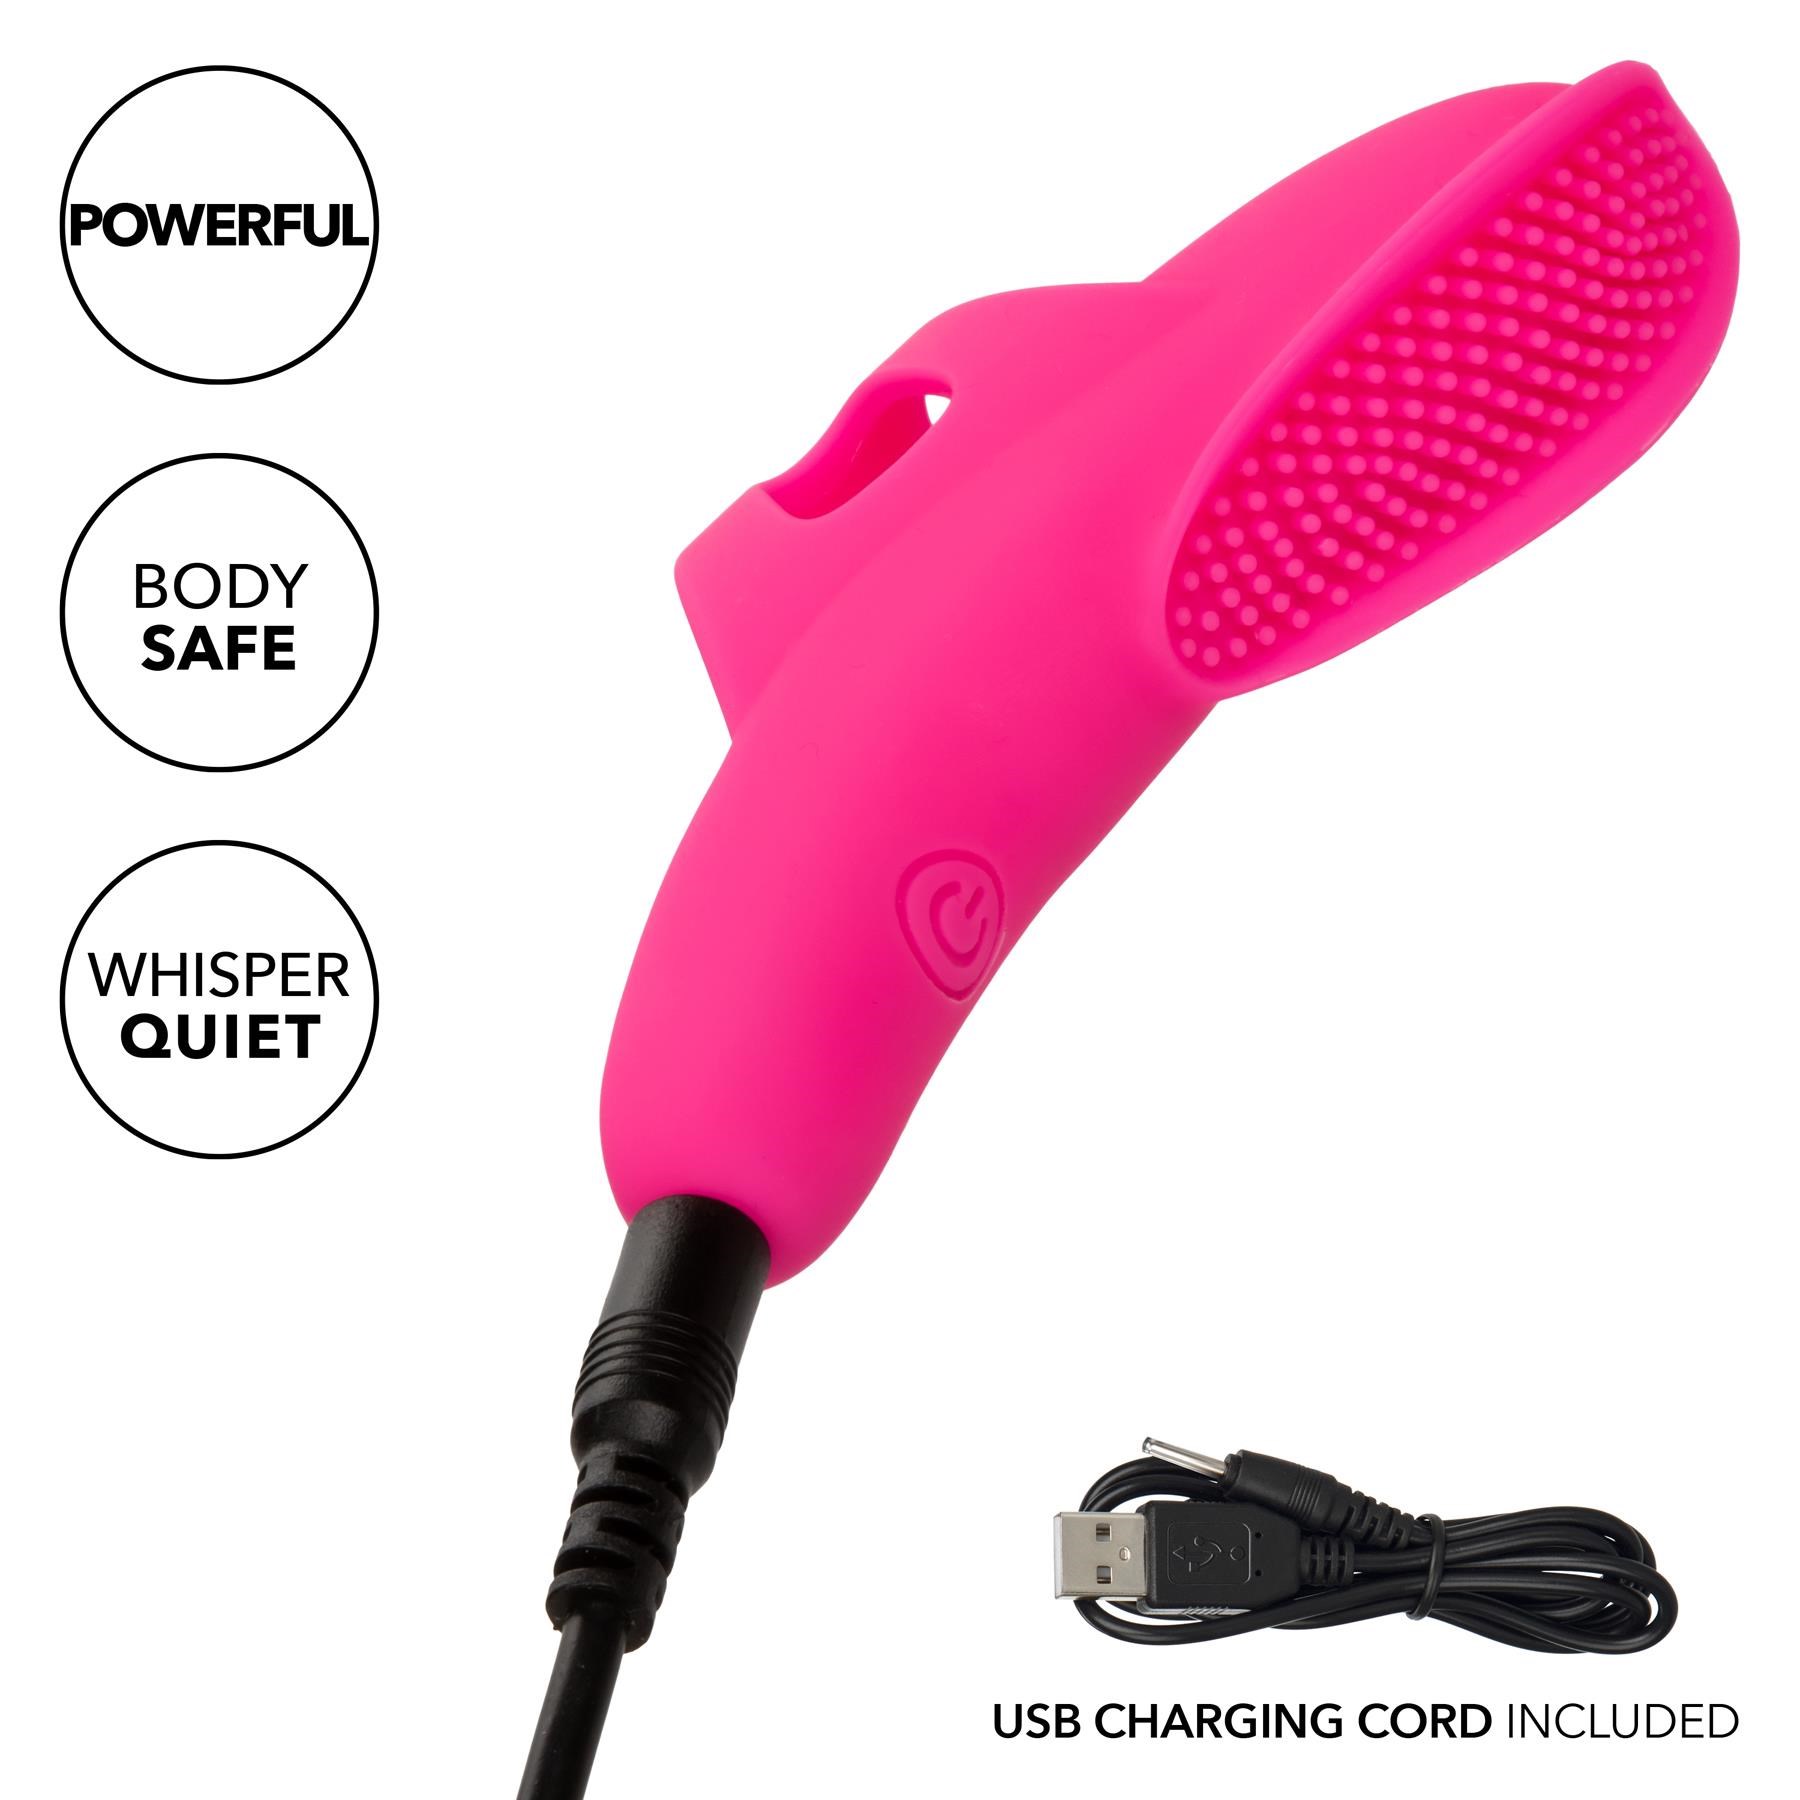 Neon Vibes The Nubby Finger Vibrator- Showing Where Charging Cable is Placed